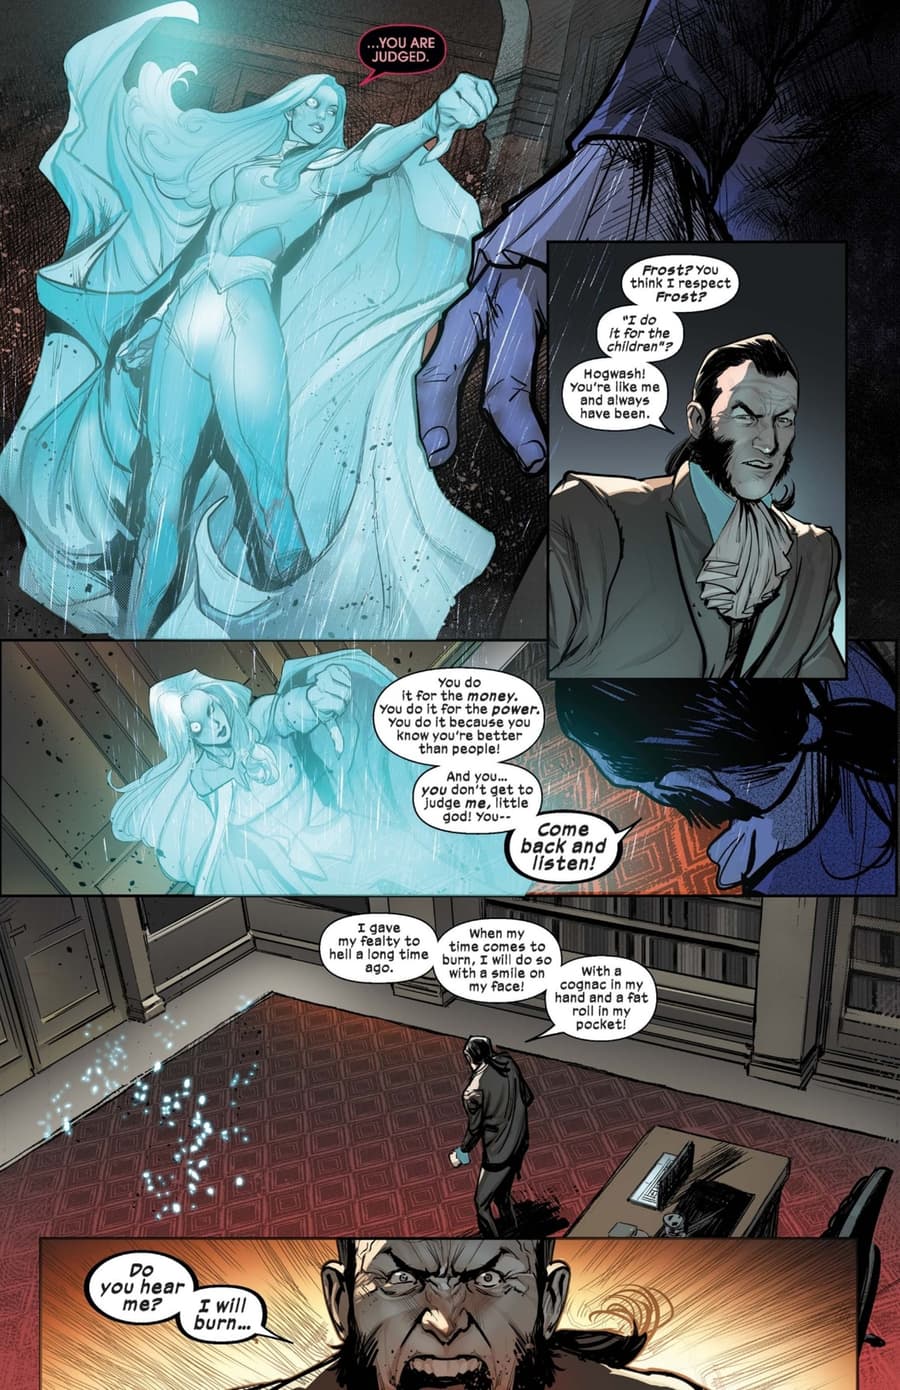 IMMORTAL X-MEN (2022) #6 page by Kieron Gillen and Lucas Werneck